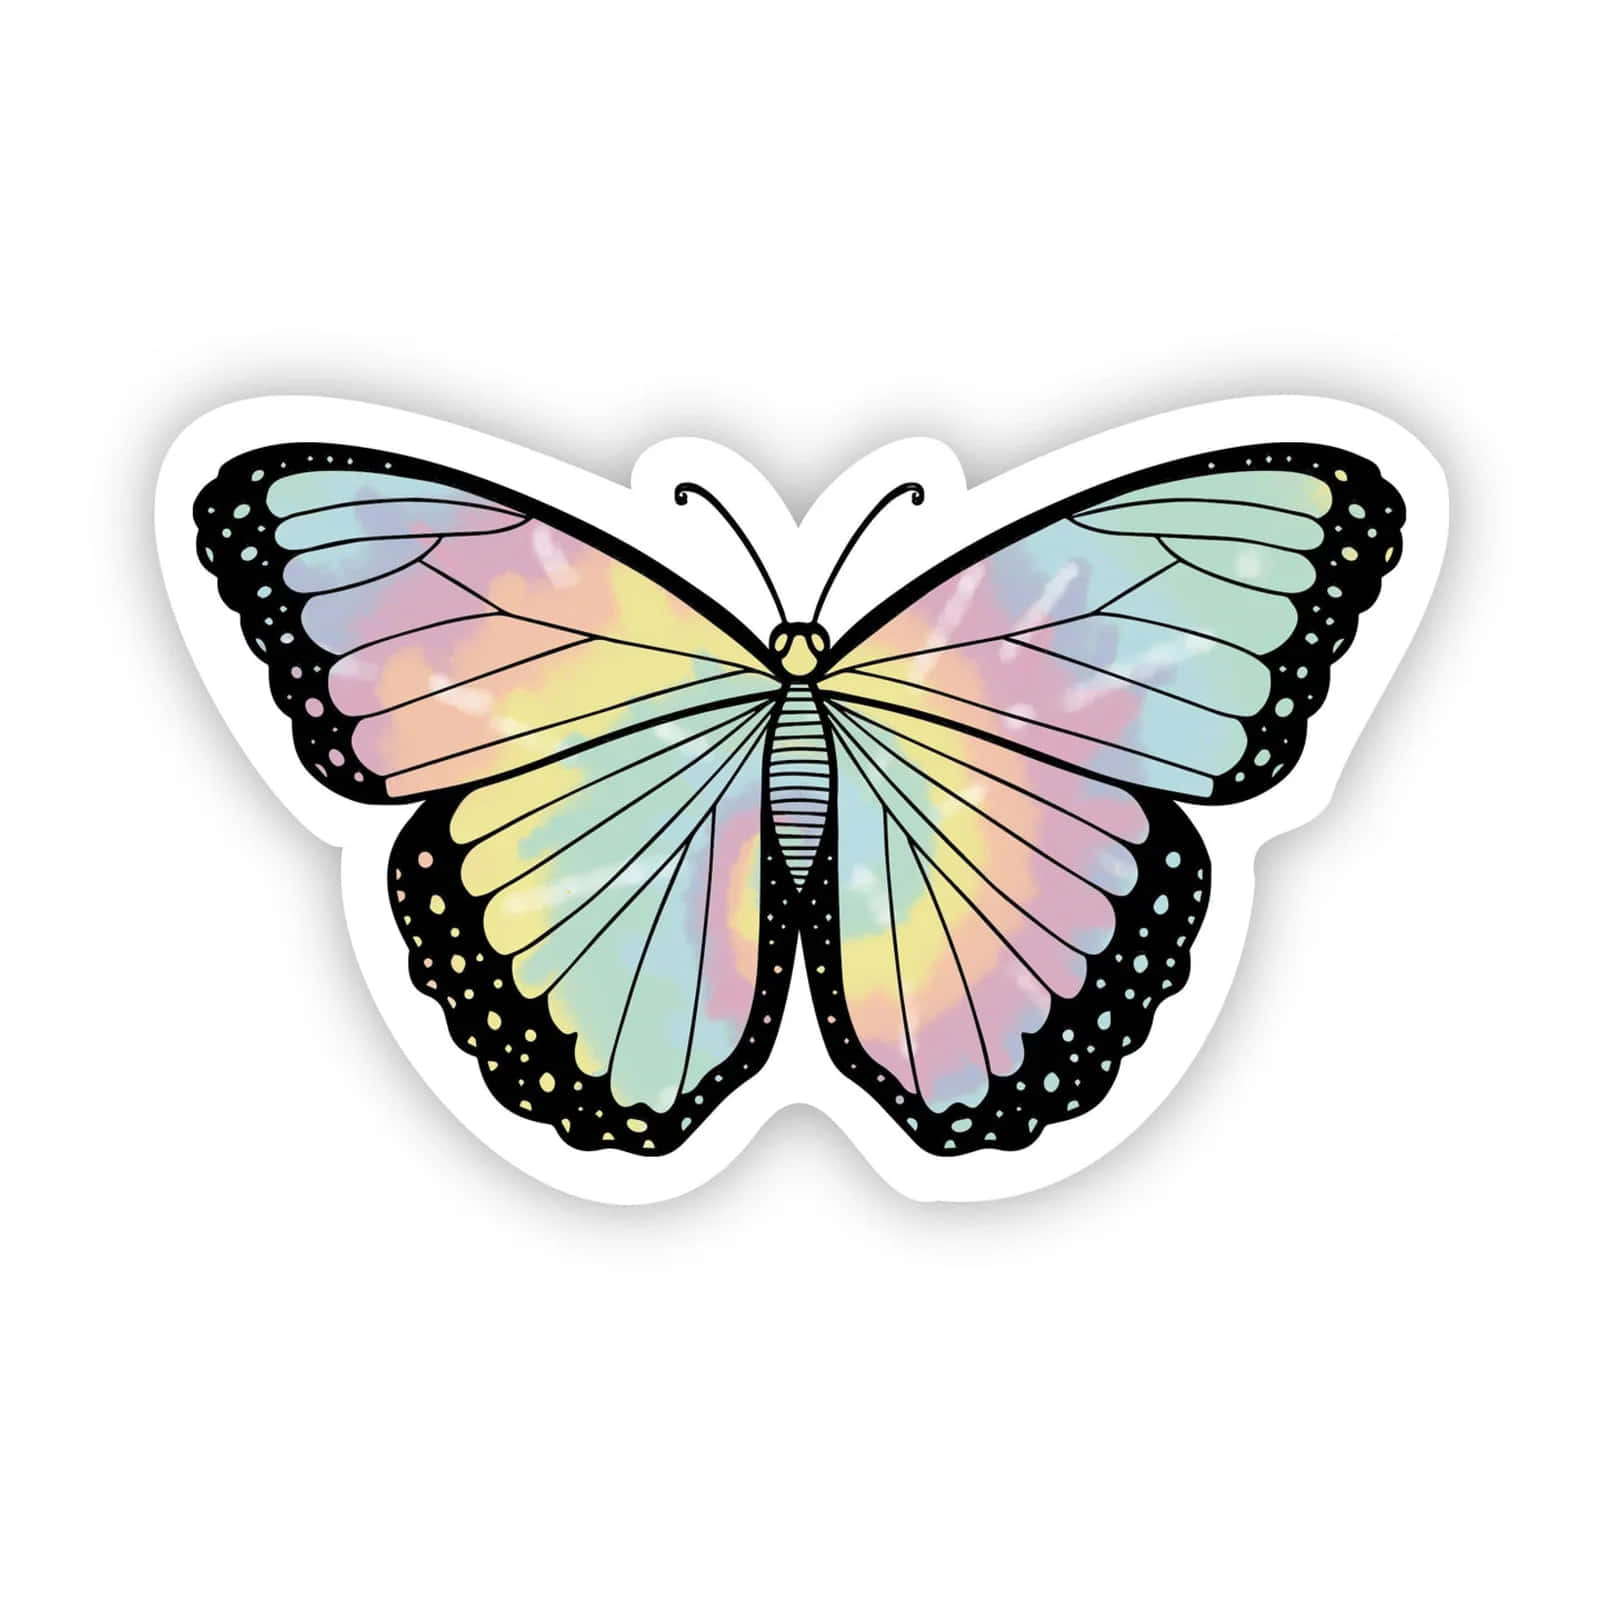 A Butterfly Sticker With Rainbow Colors